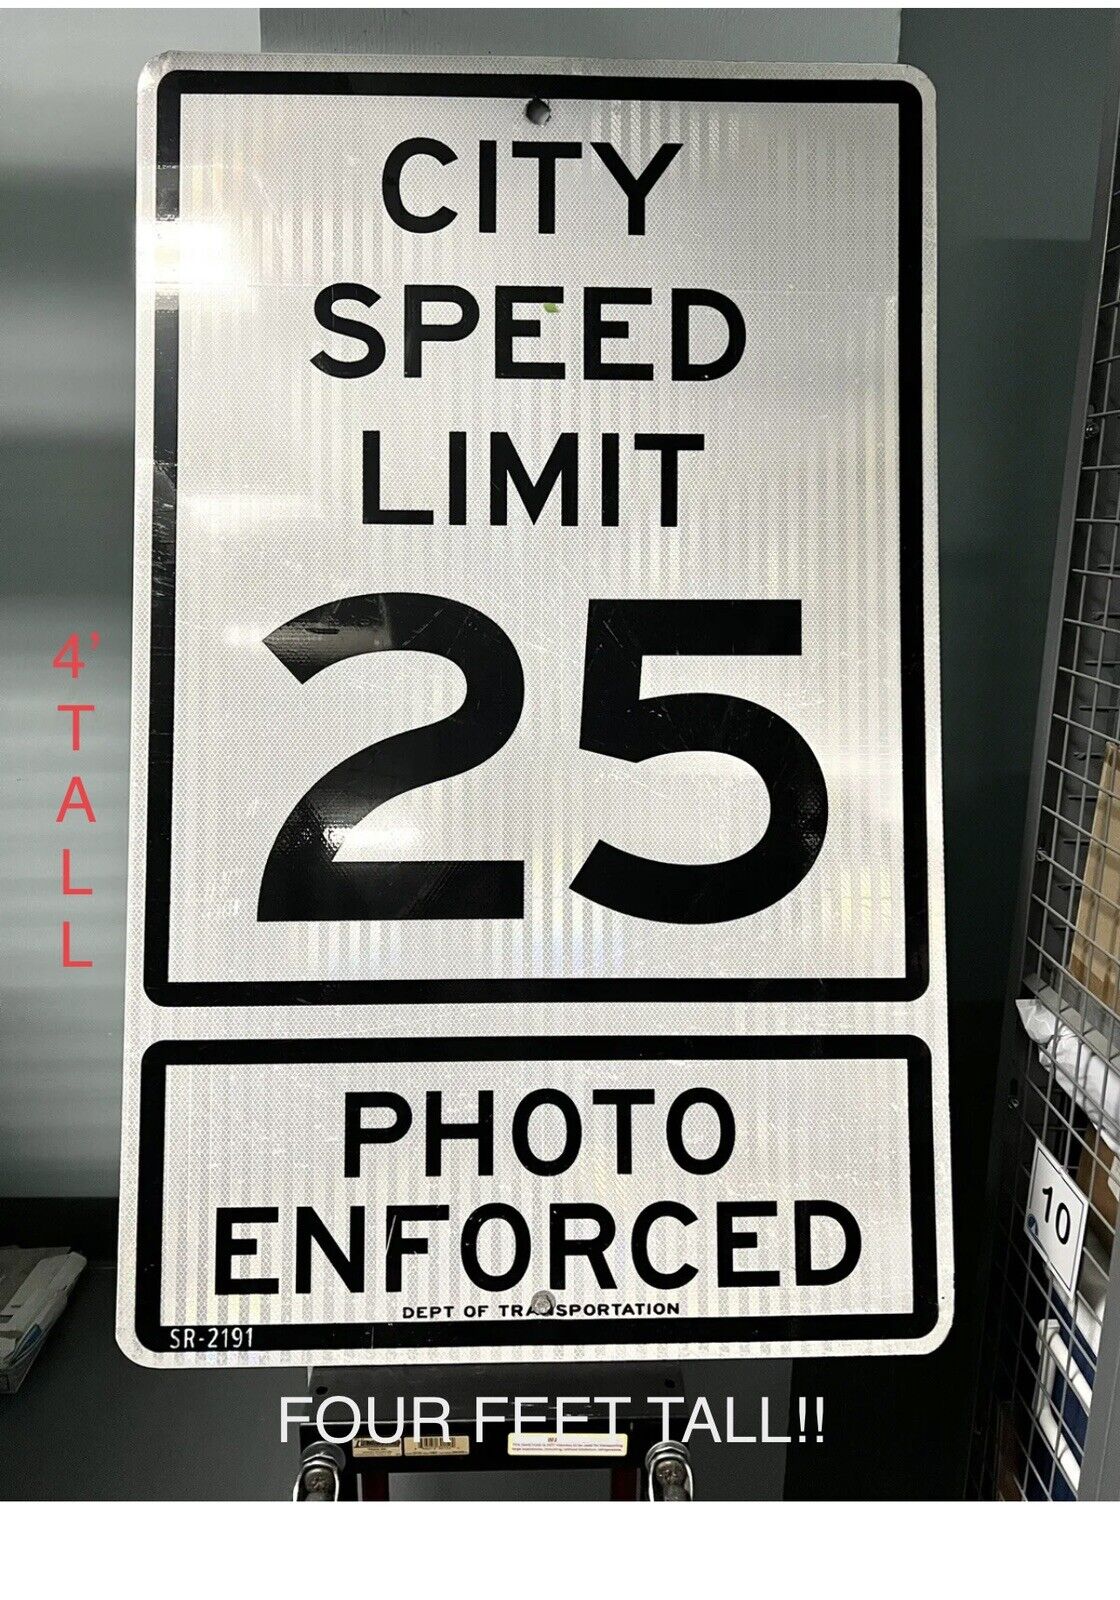 NYC STREET SIGN AUTHENTIC “CITY SPEED LIMIT-PHOTO ENFORCED” HUGE4’ TALL EX COND